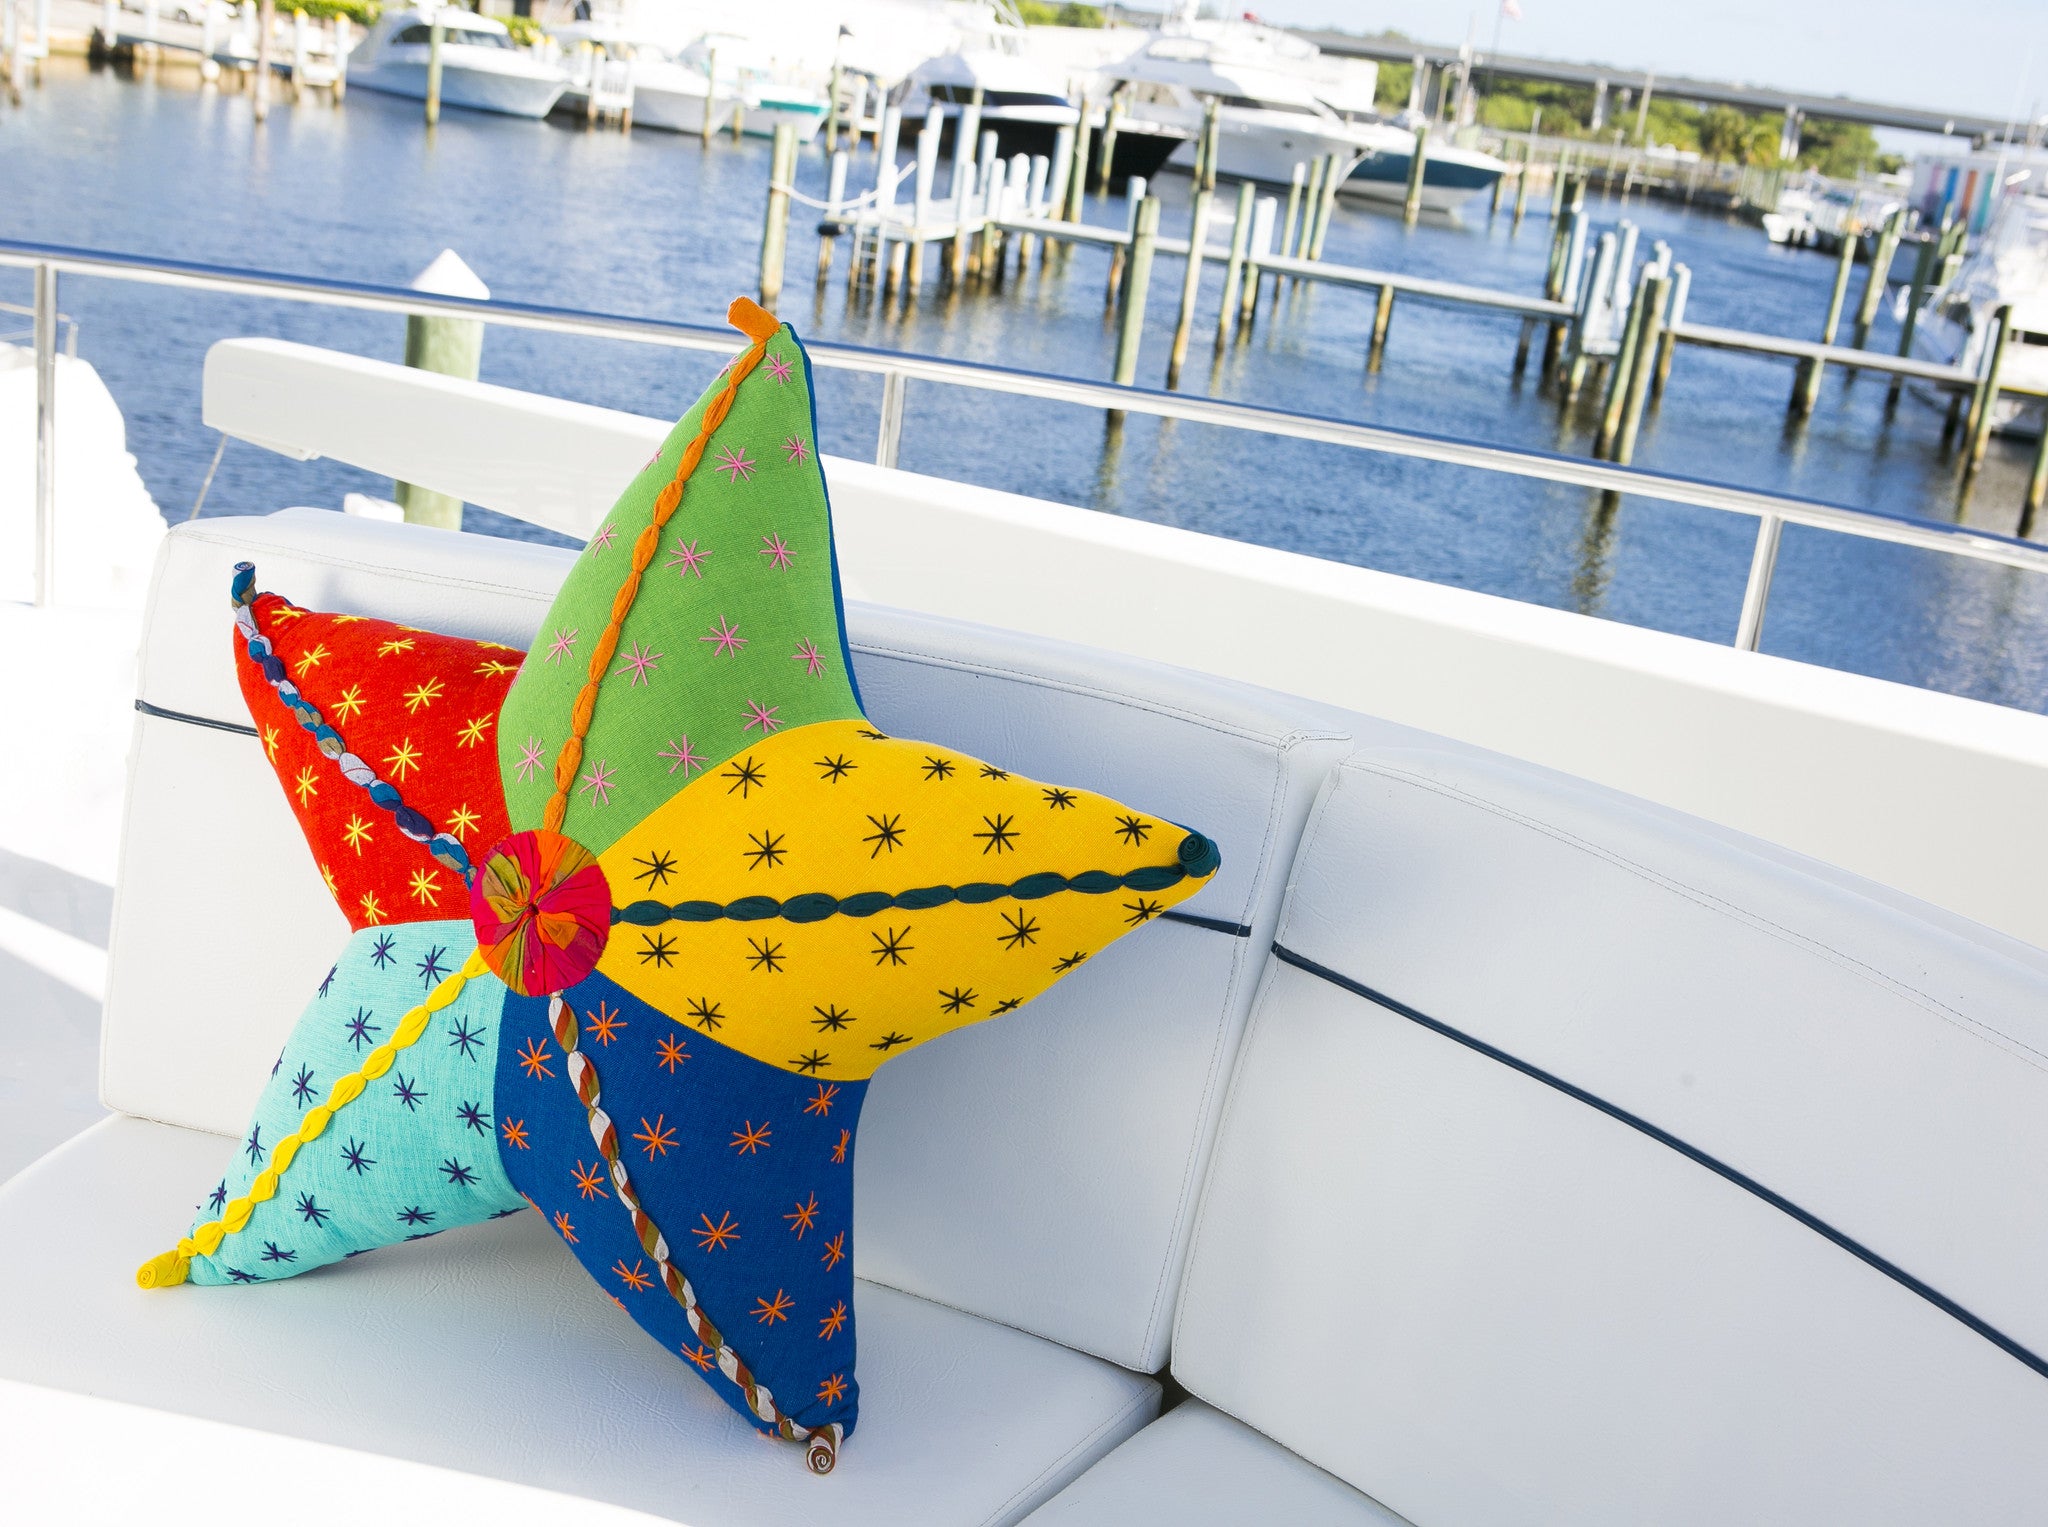 Stella, the Starfish – Adds the perfect punch of color to your boat!